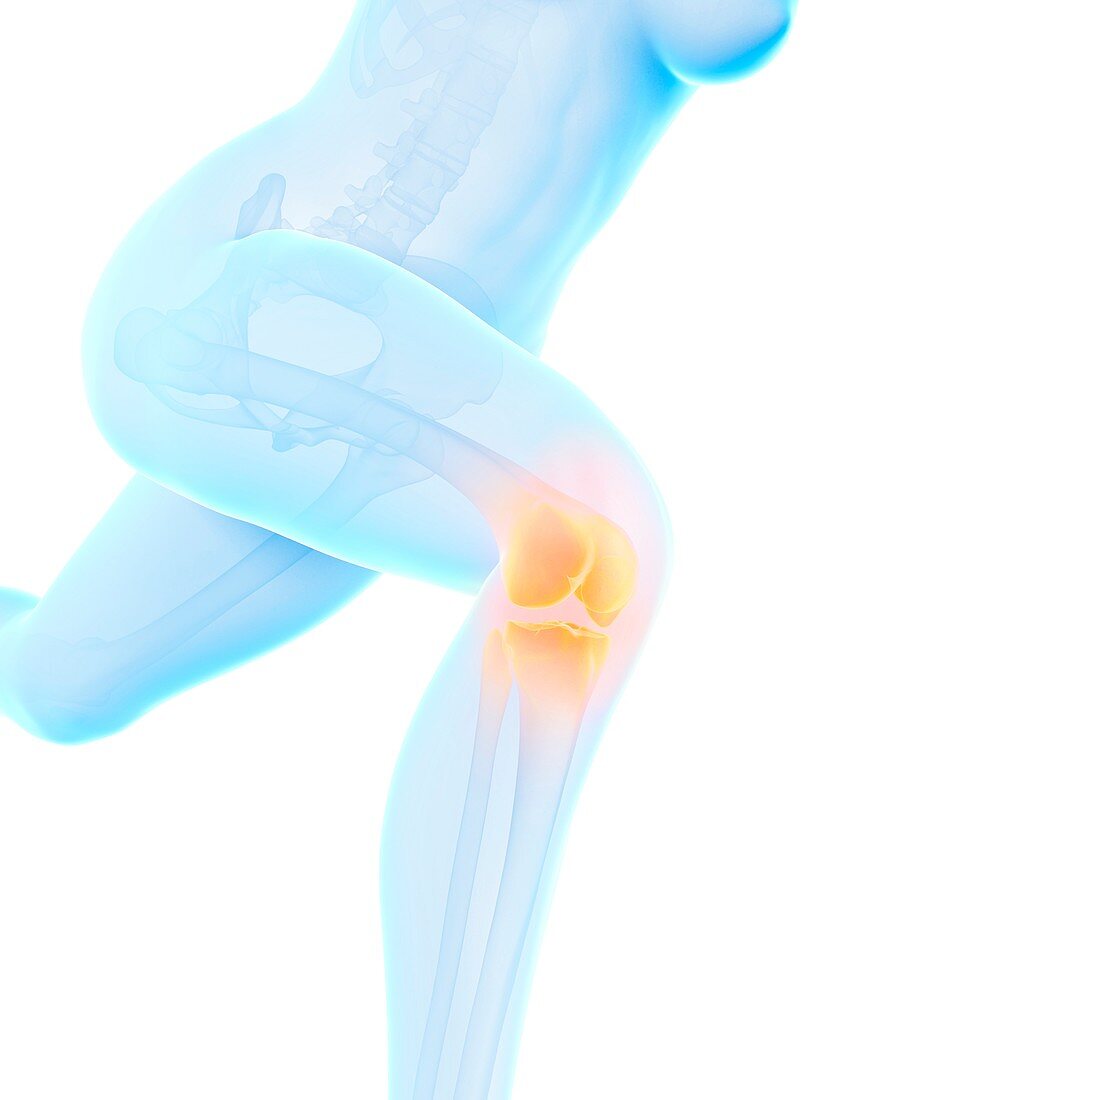 Jogger with knee pain,illustration